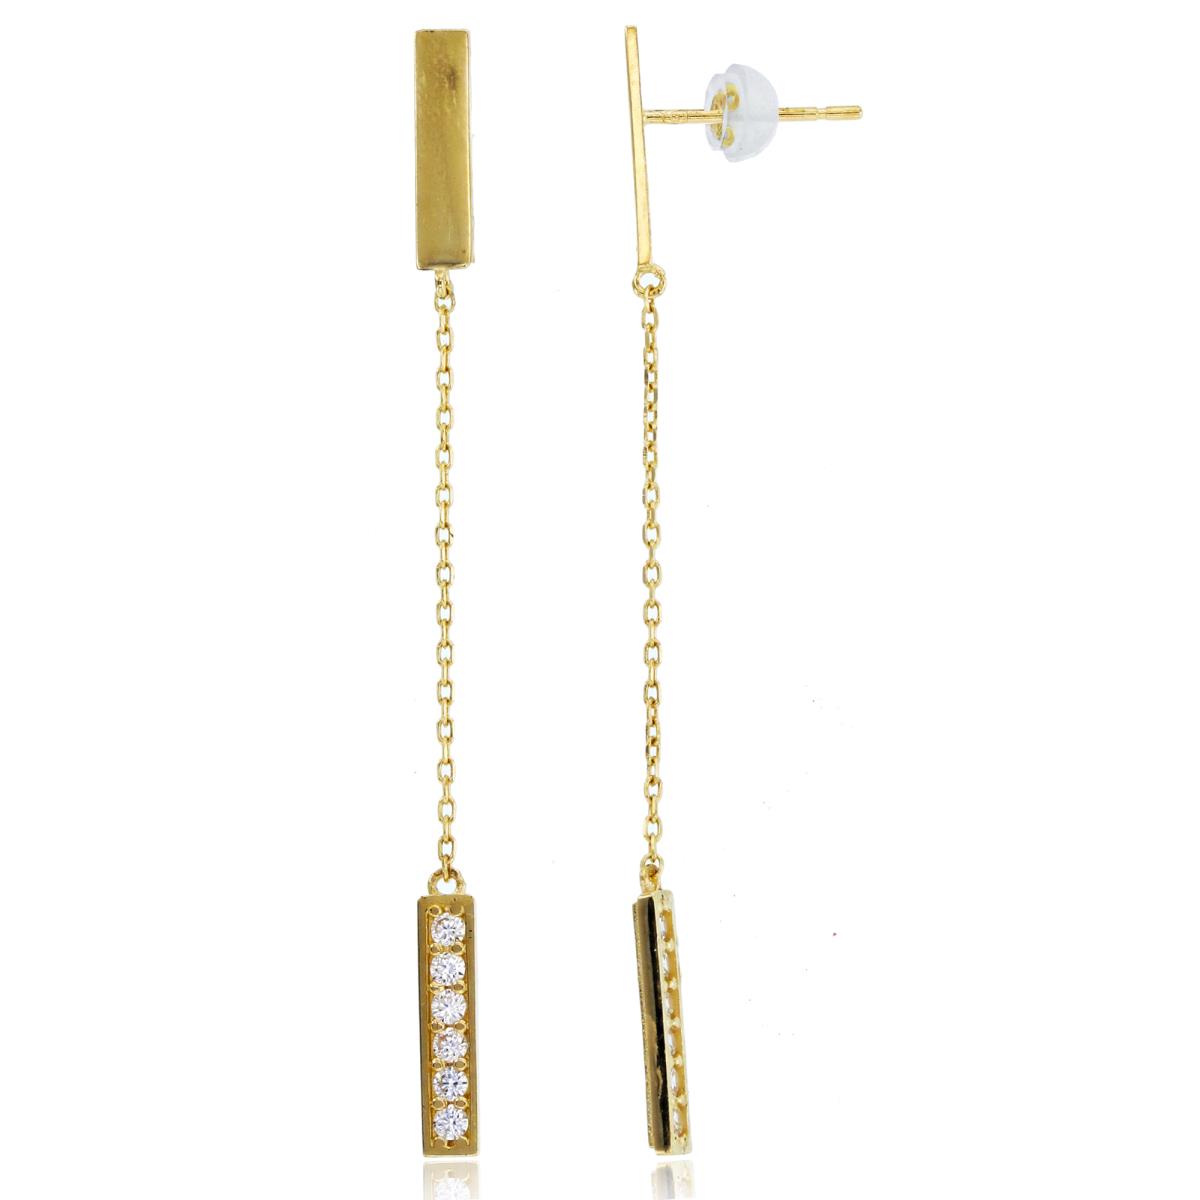 14K Yellow Gold High Polished Top & Rnd CZ Bottom Bar Dangling Chain Earrings with Silicone Backs